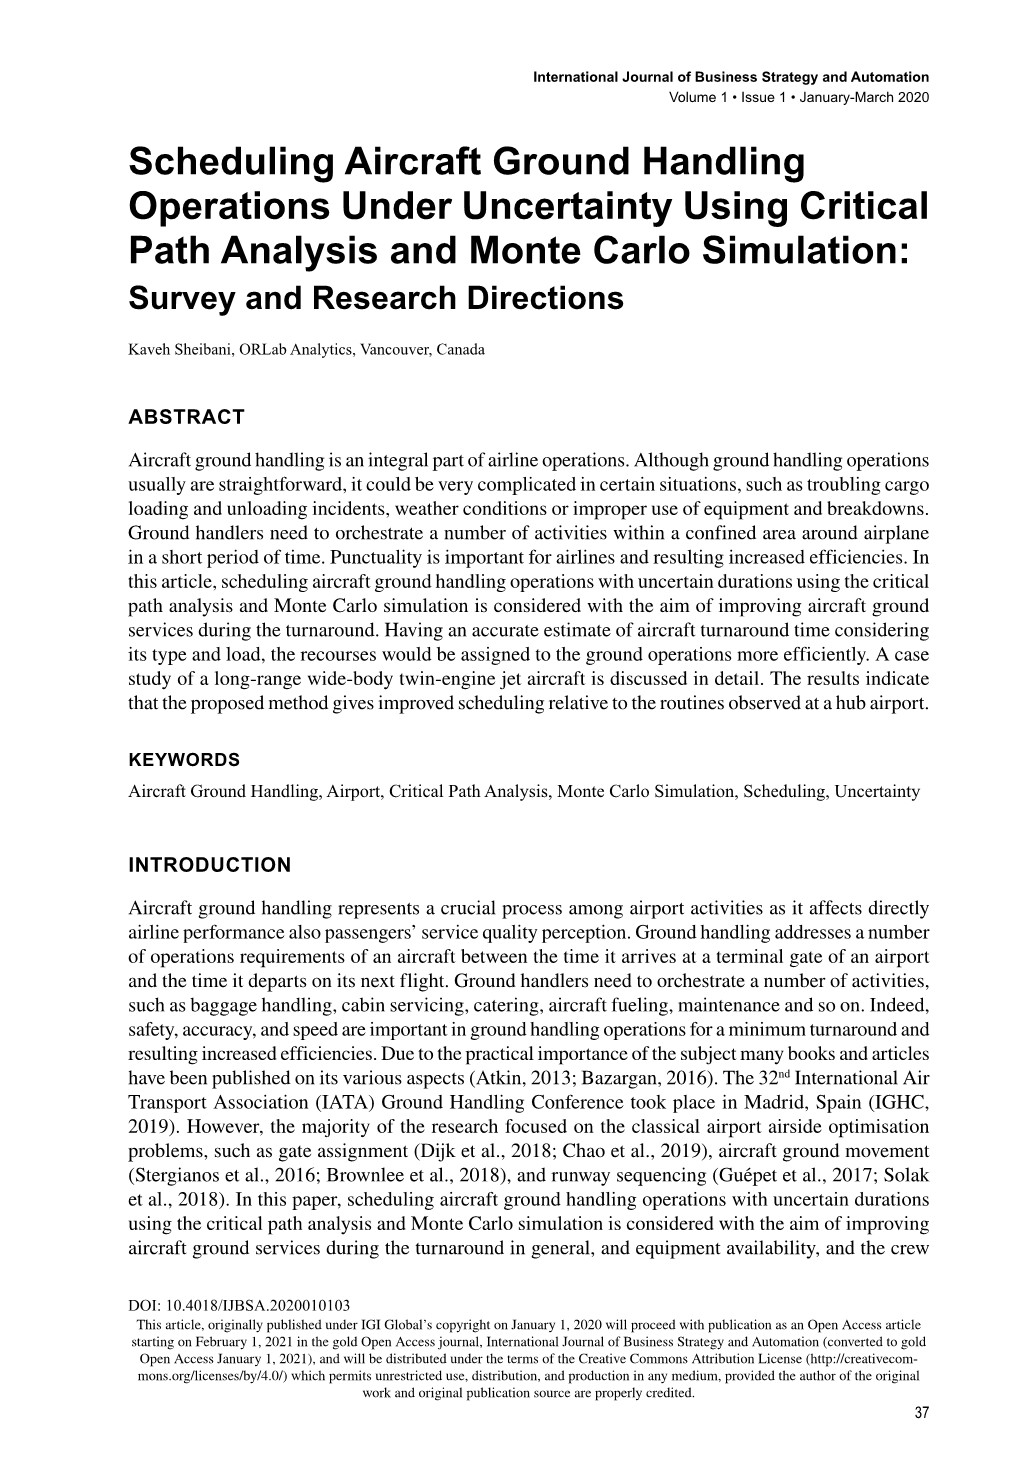 Scheduling Aircraft Ground Handling Operations Under Uncertainty Using Critical Path Analysis and Monte Carlo Simulation: Survey and Research Directions